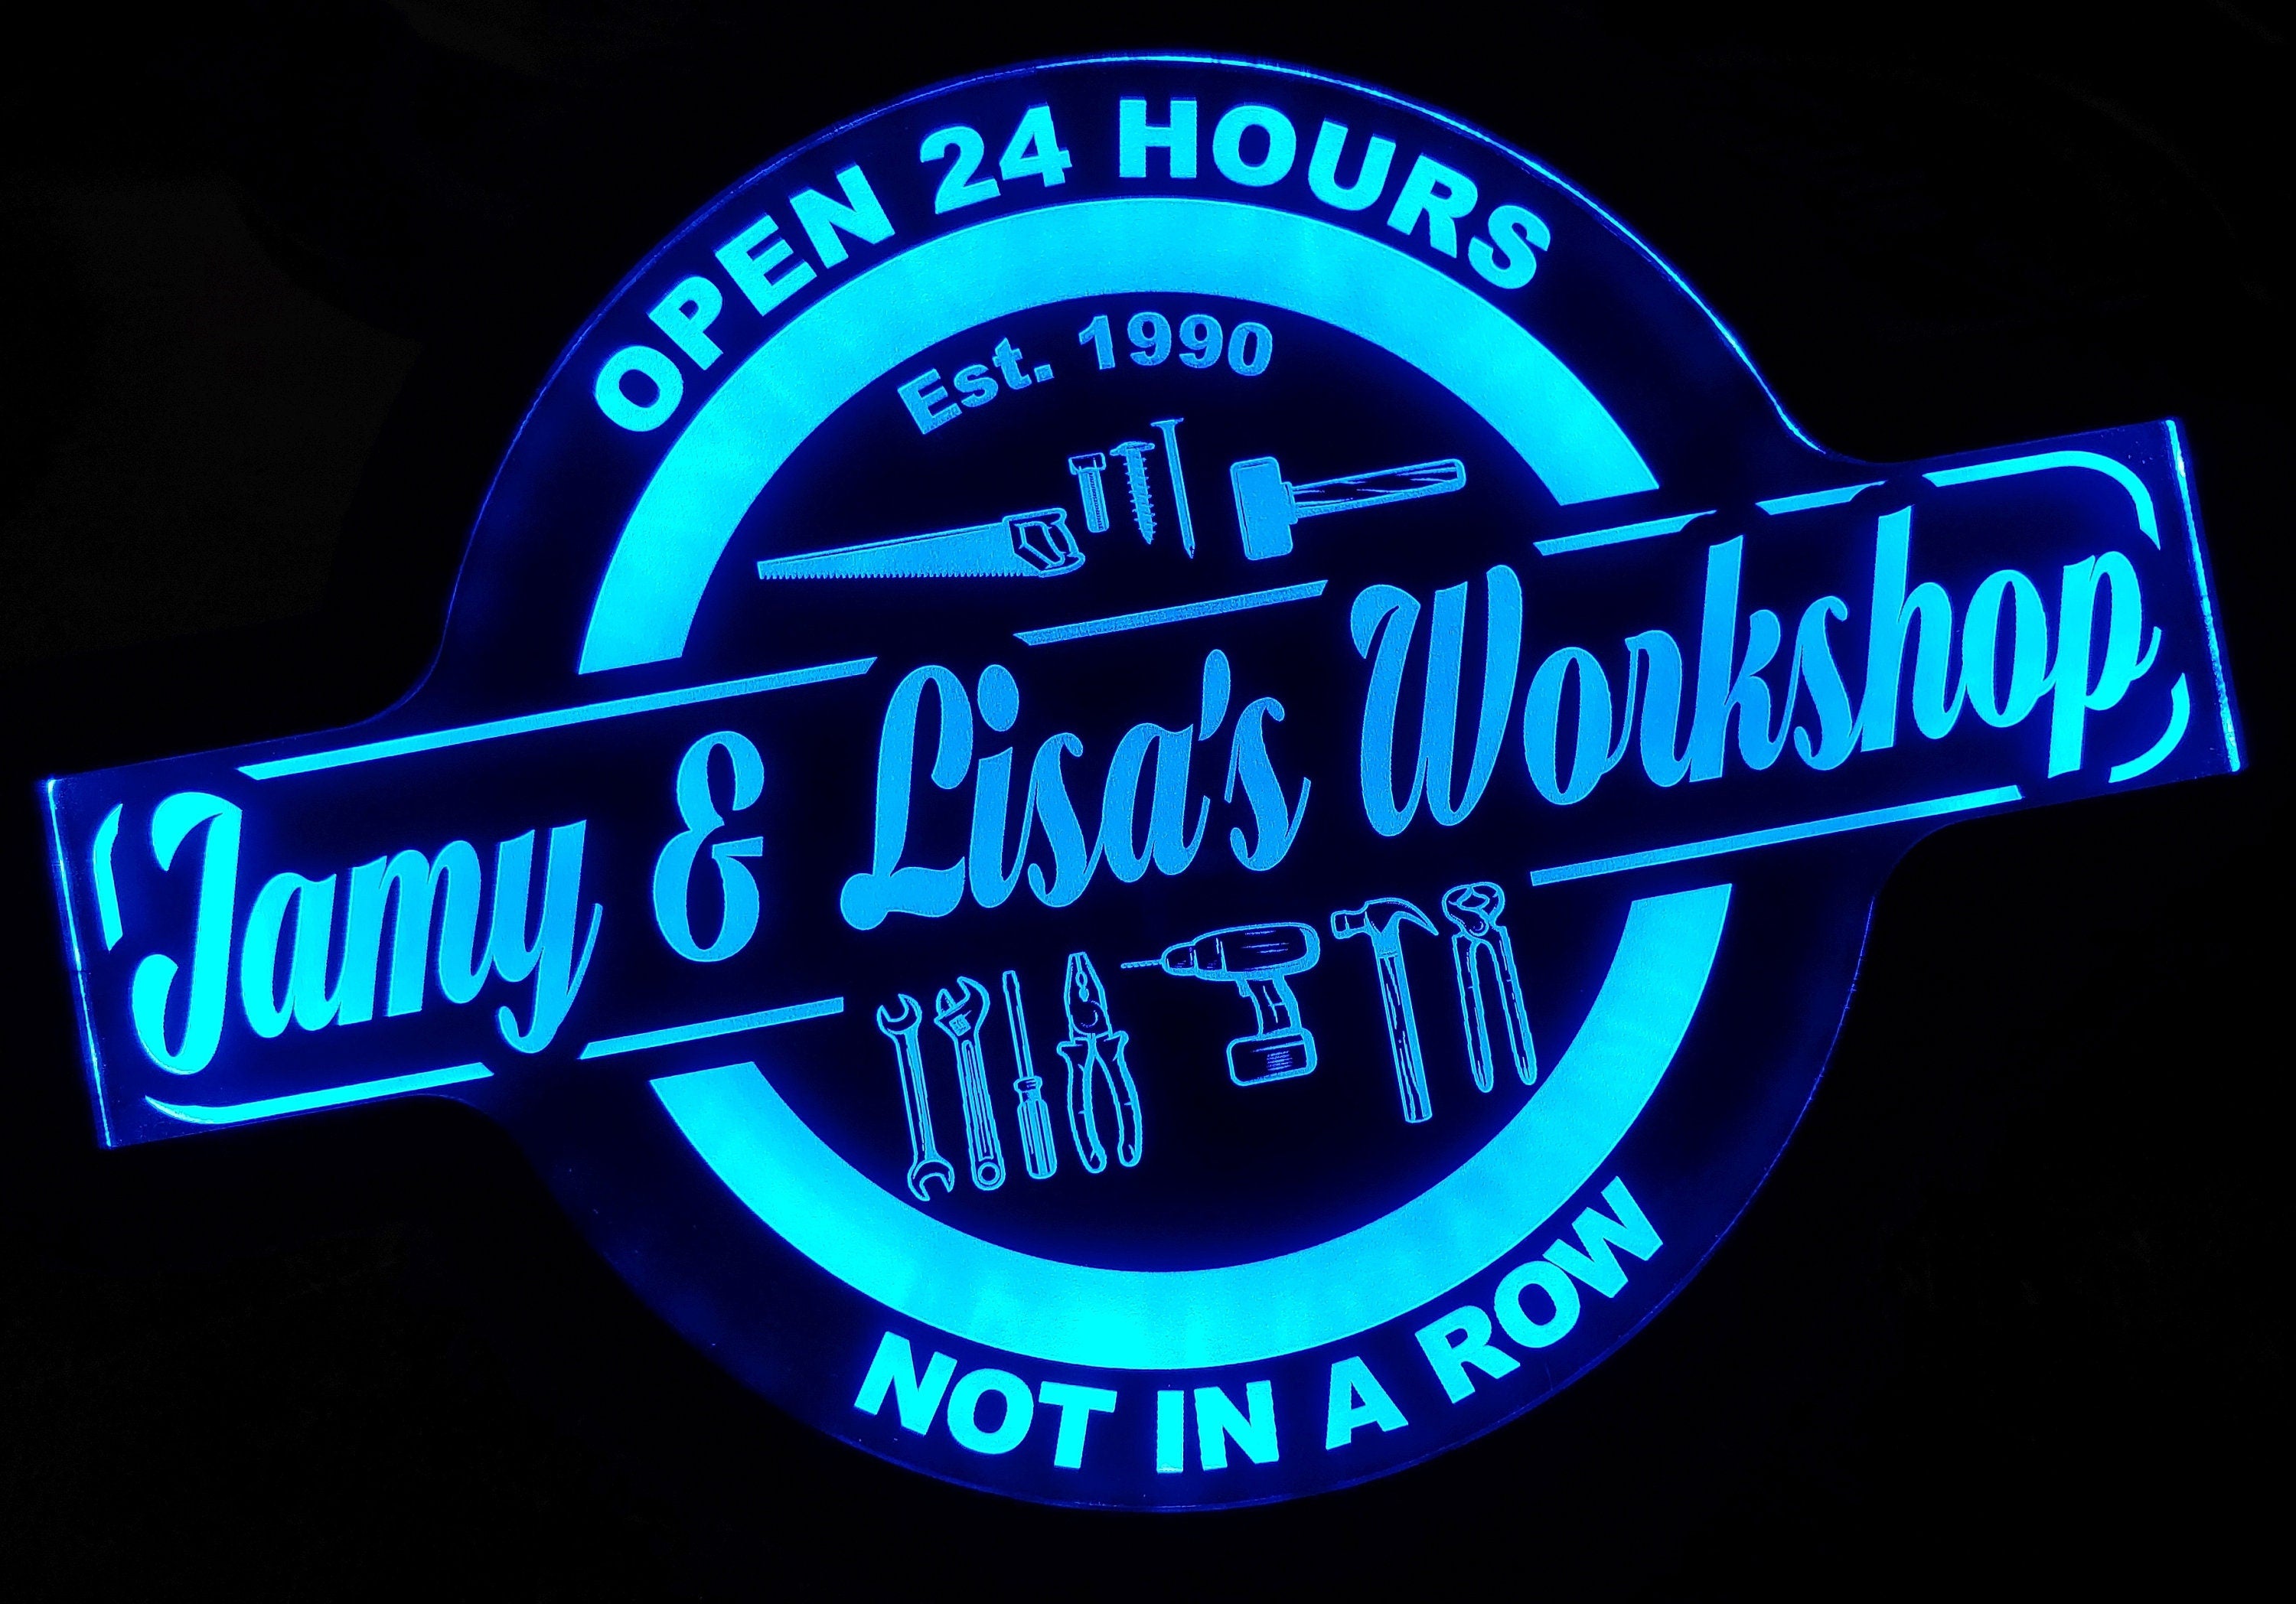 Custom Workshop Handyman Carpenter Led Wall Sign Neon Like - Color Changing Remote Control - 4 Sizes Free Shipping